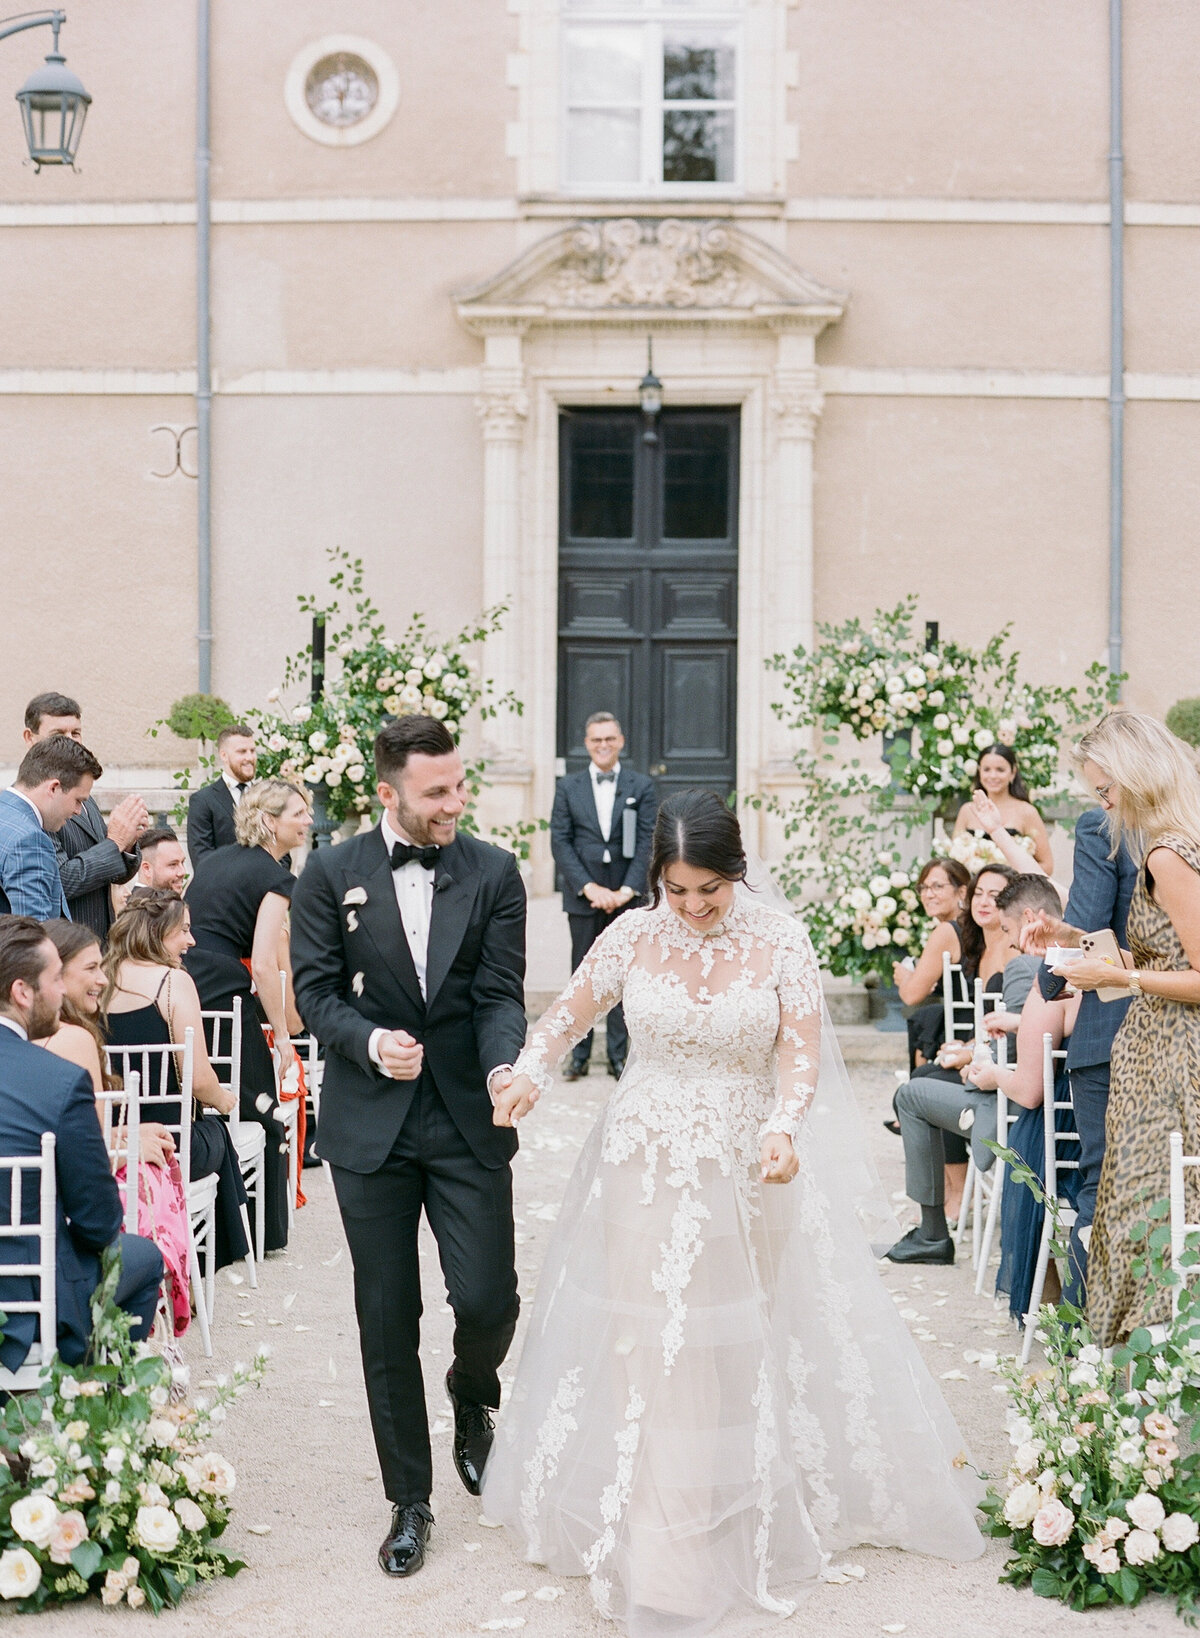 Jennifer Fox Weddings English speaking wedding planning & design agency in France crafting refined and bespoke weddings and celebrations Provence, Paris and destination Molly-Carr-Photography-Natalie-Ryan-Ceremony-102